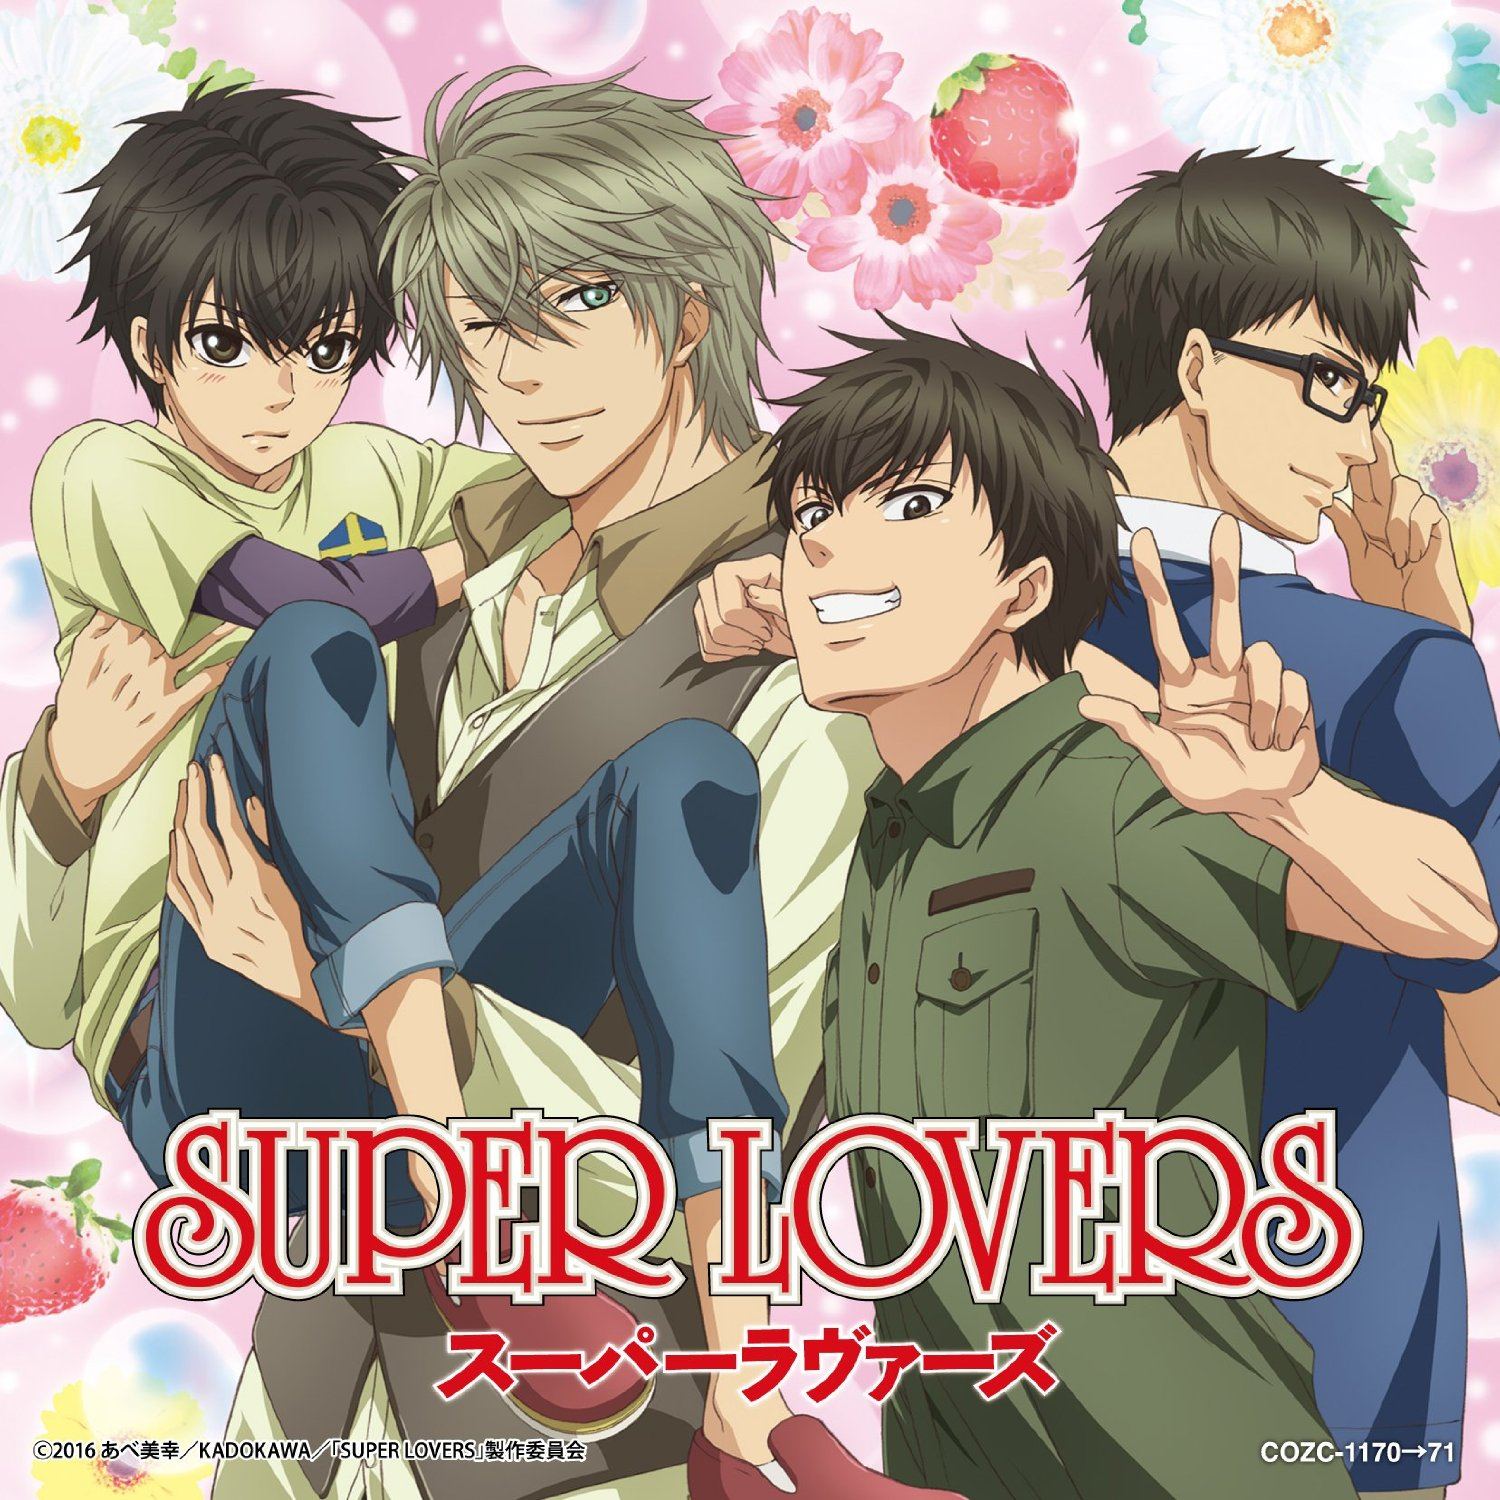 [Anime] Super Lovers 2 Happiness-you-me-super-lovers-outro-theme-cd-dvd-limited-editi-468031.2